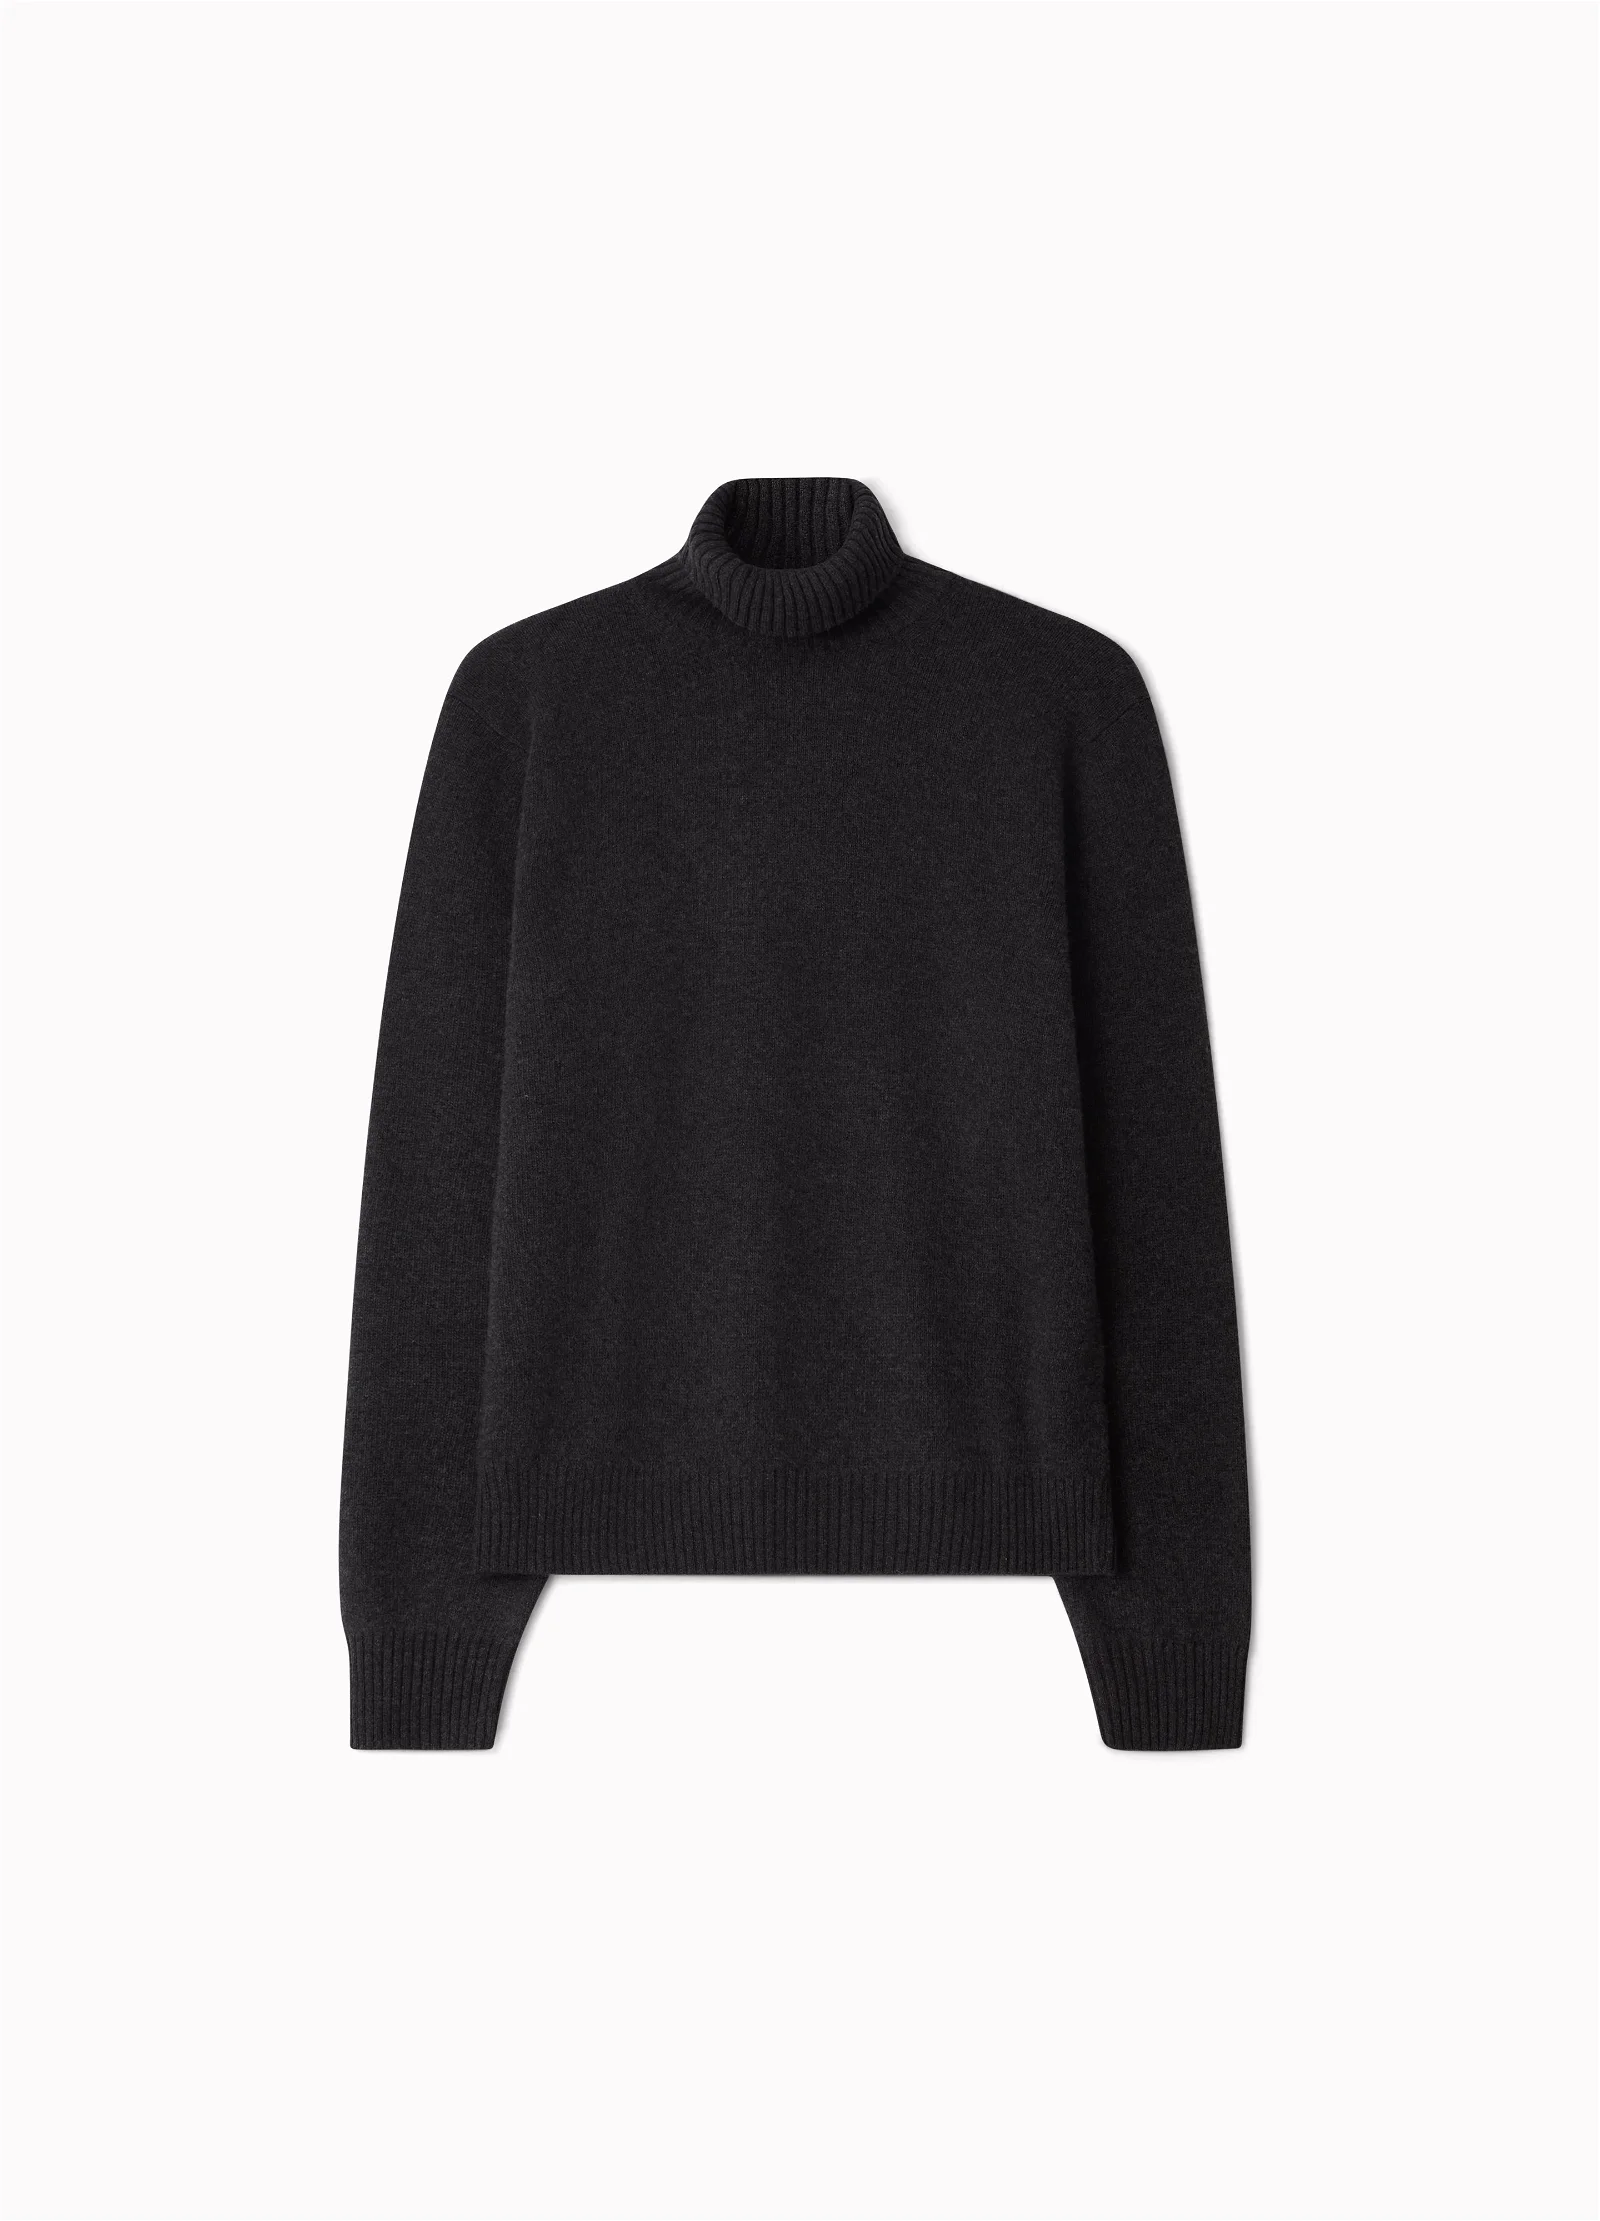 Image of Benedict Rollneck Sweater - Charcoal